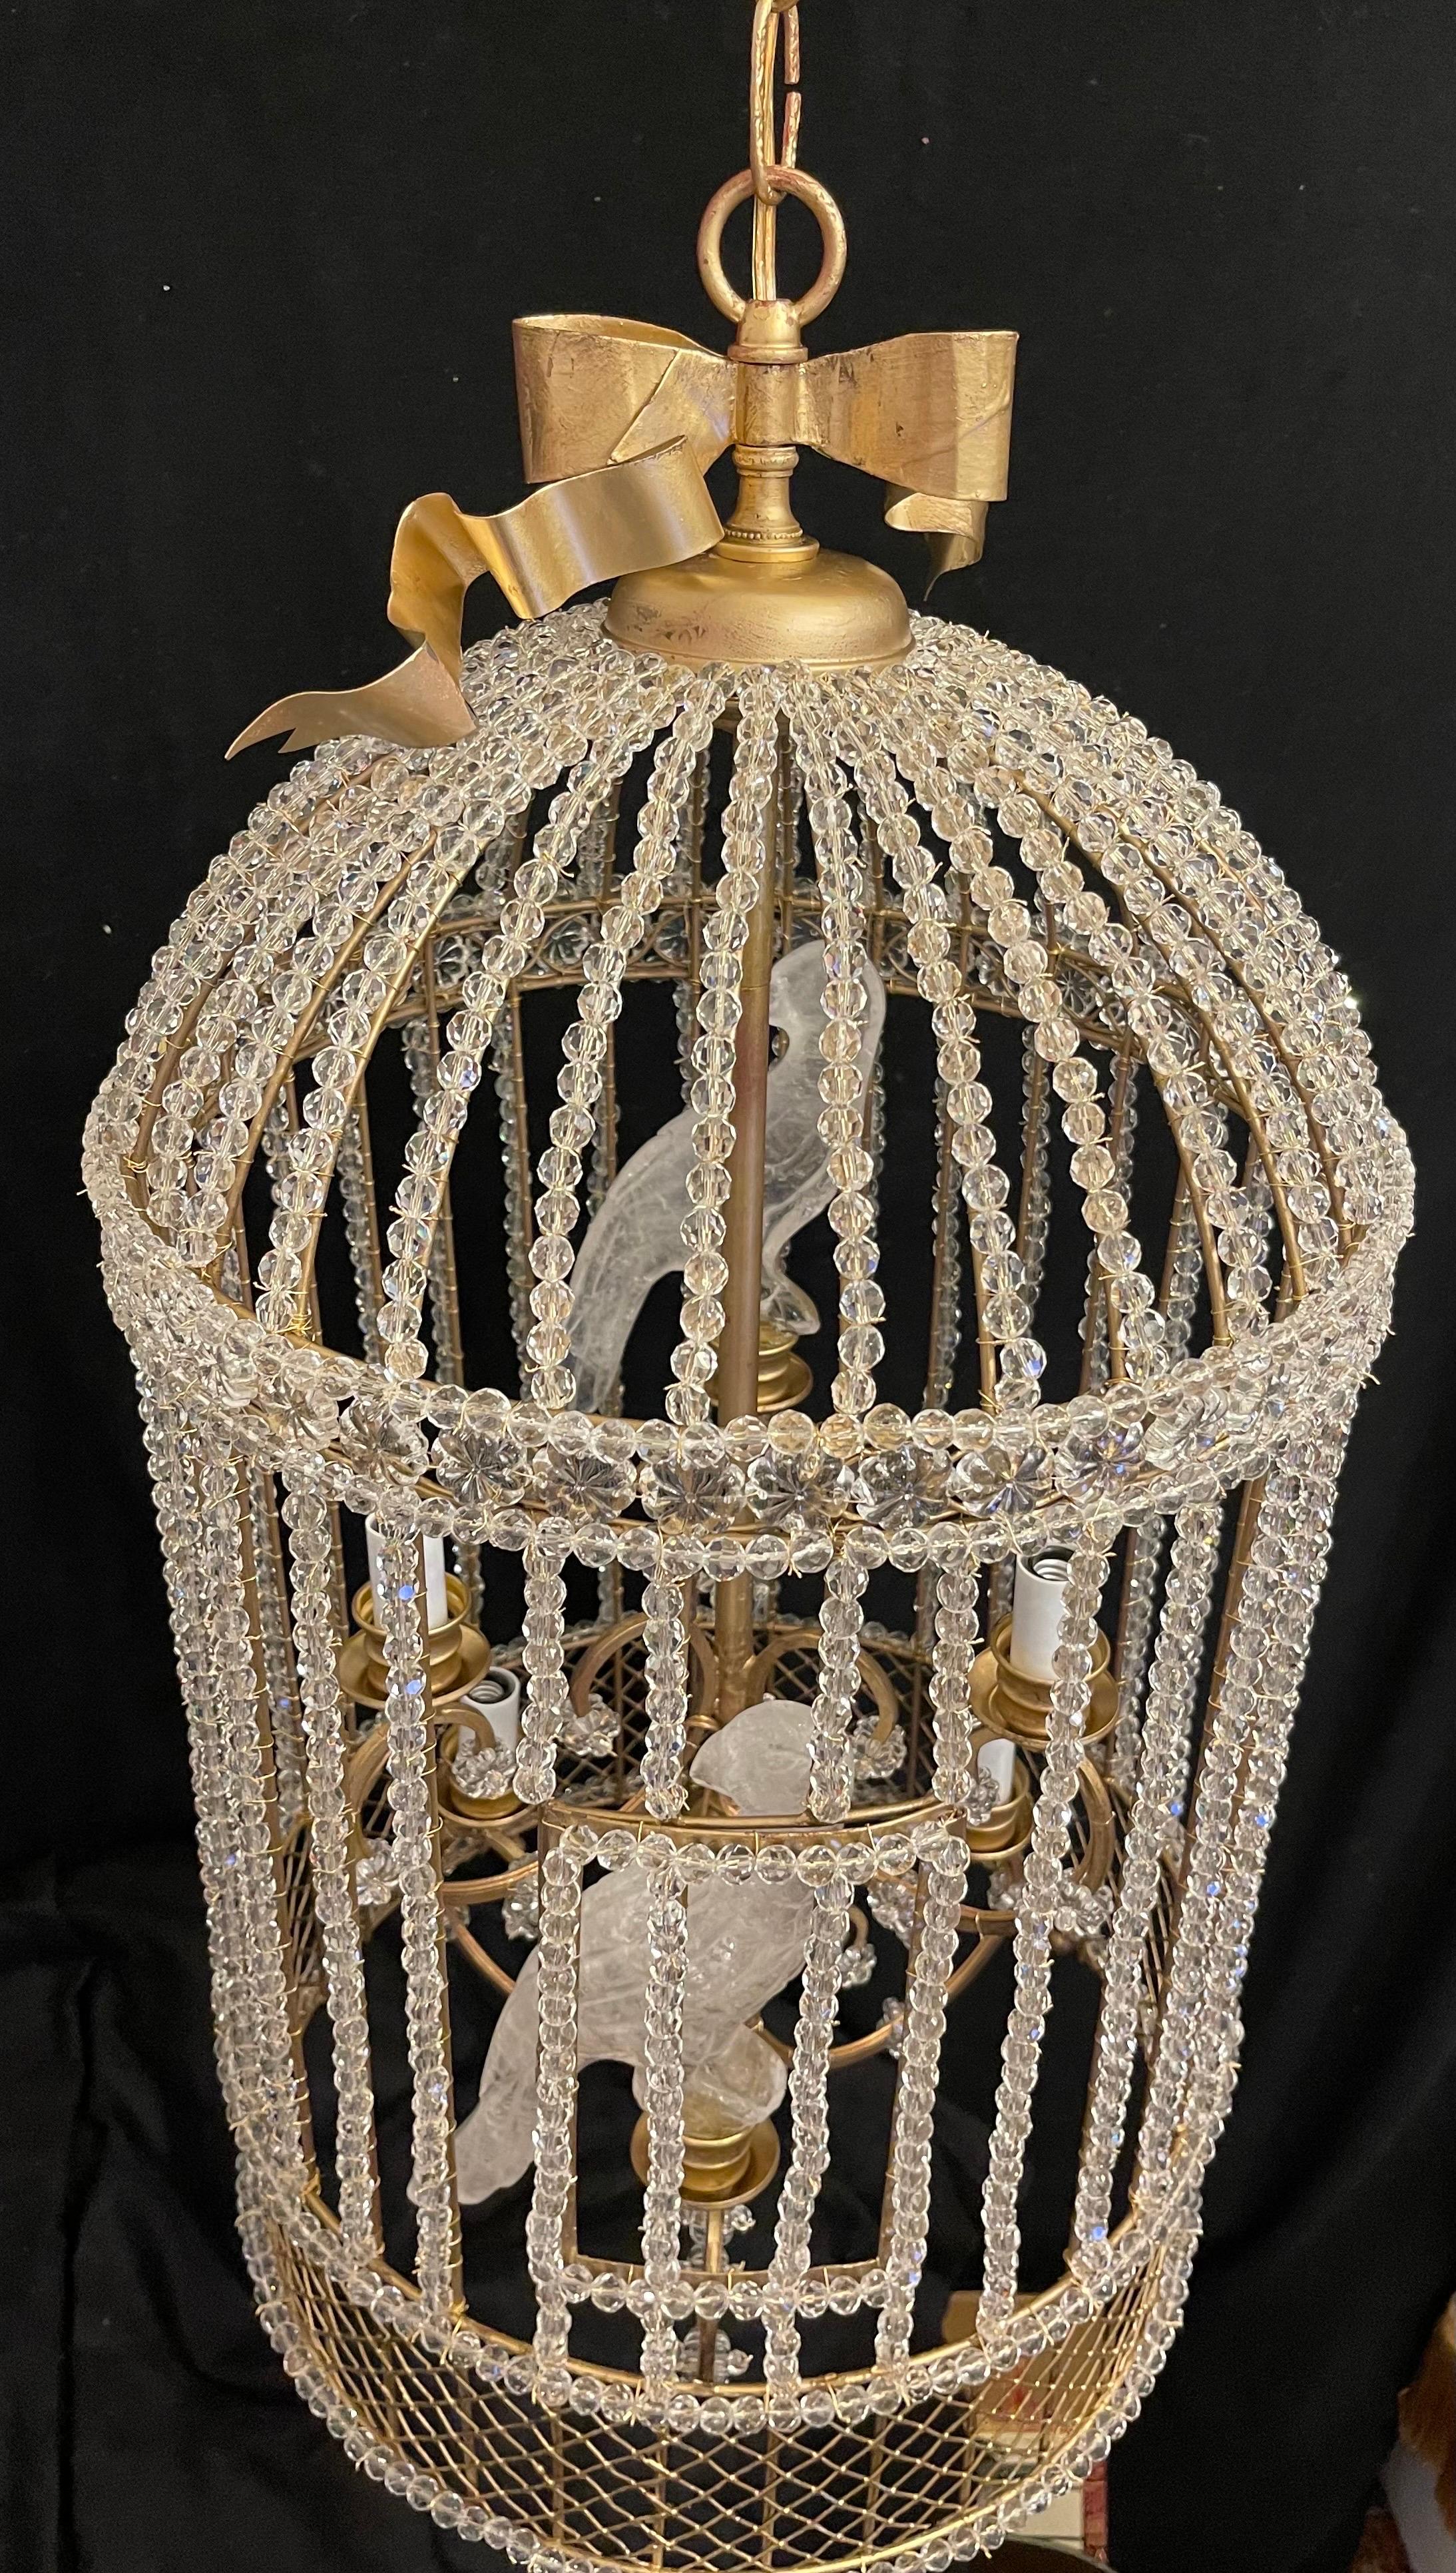 A Wonderful French Louis XVI, In The Manner Of Maison Baguès Style Gold Gilt & Crystal Beaded Bird Cage Form Chandelier Housing Two Tiers Of 4 Candelabra Lights With Alternating Rock Crystal  Parrots / Birds.  